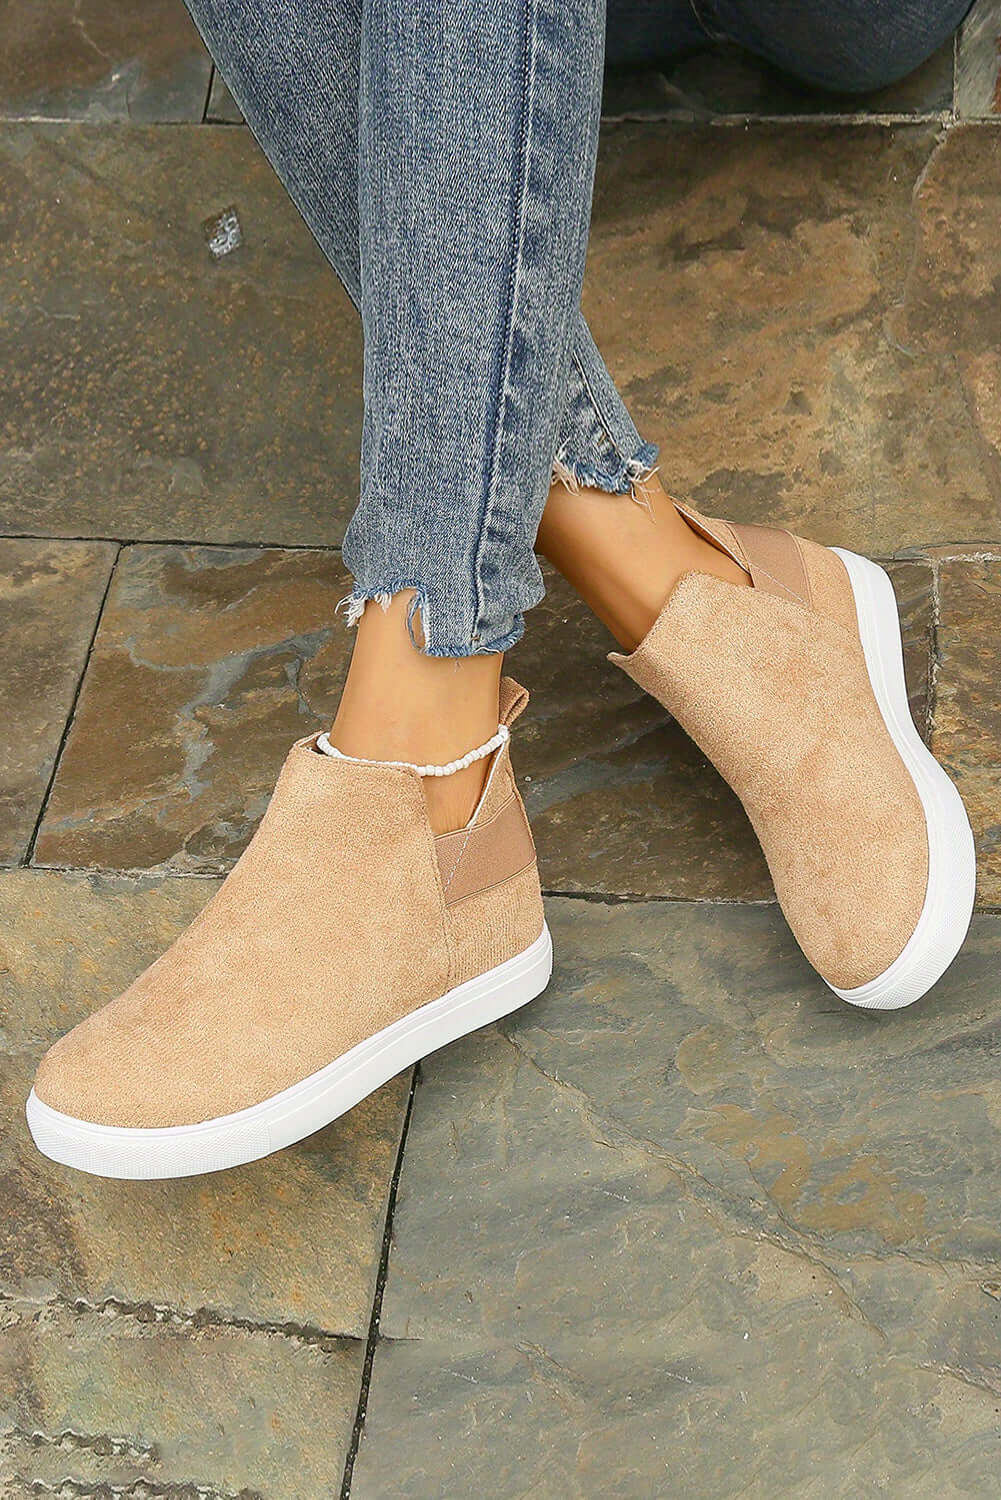 Camel Suede Slip-on Casual Boots - Dixie Hike & Style